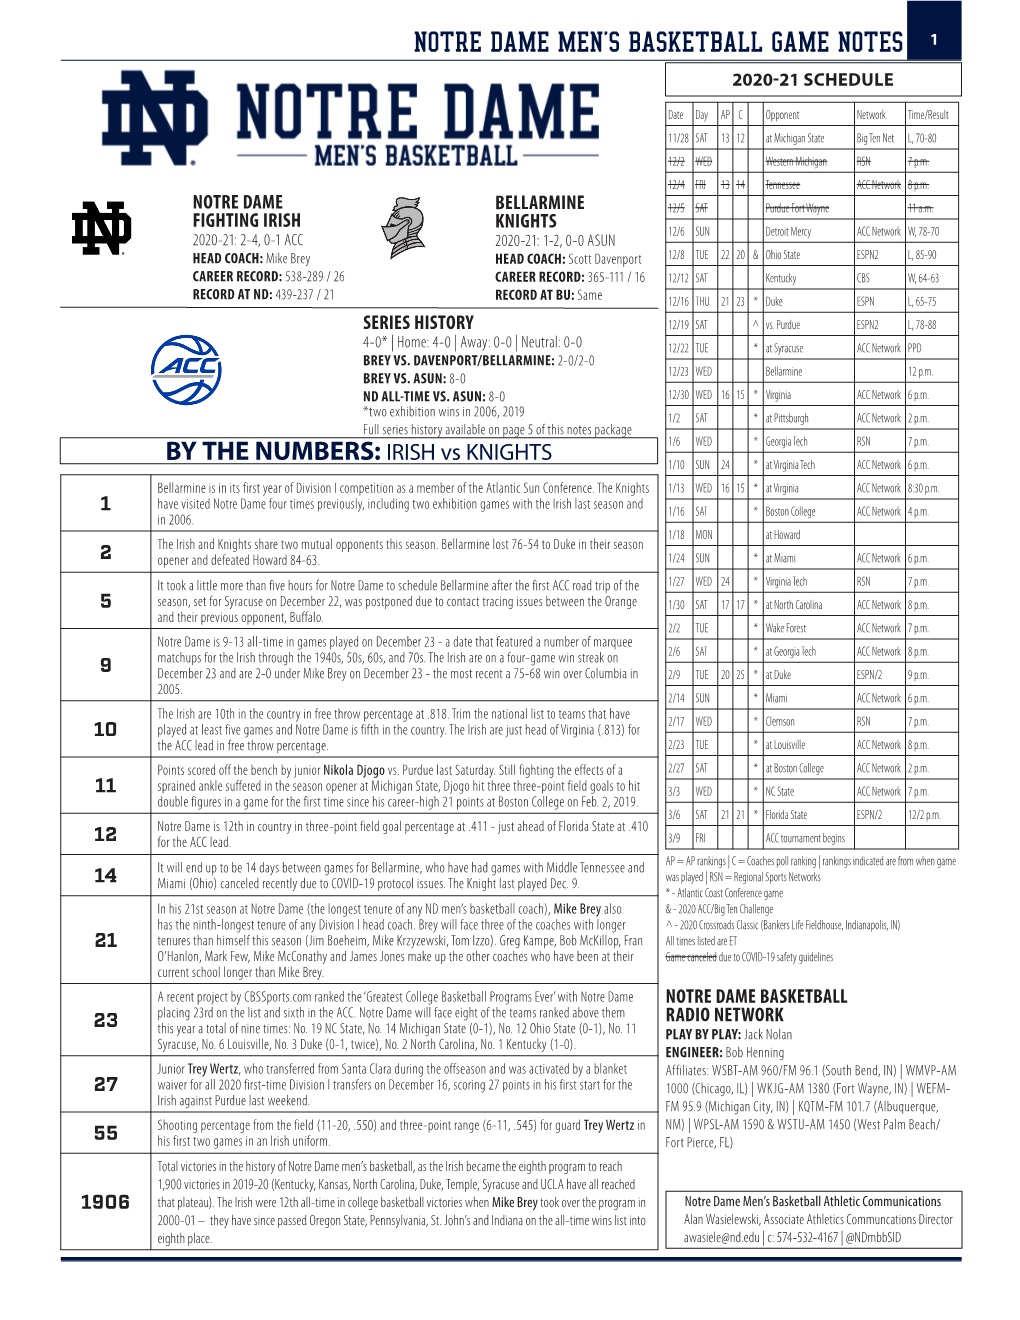 Notre Dame Men's Basketball Game Notes 1 by The